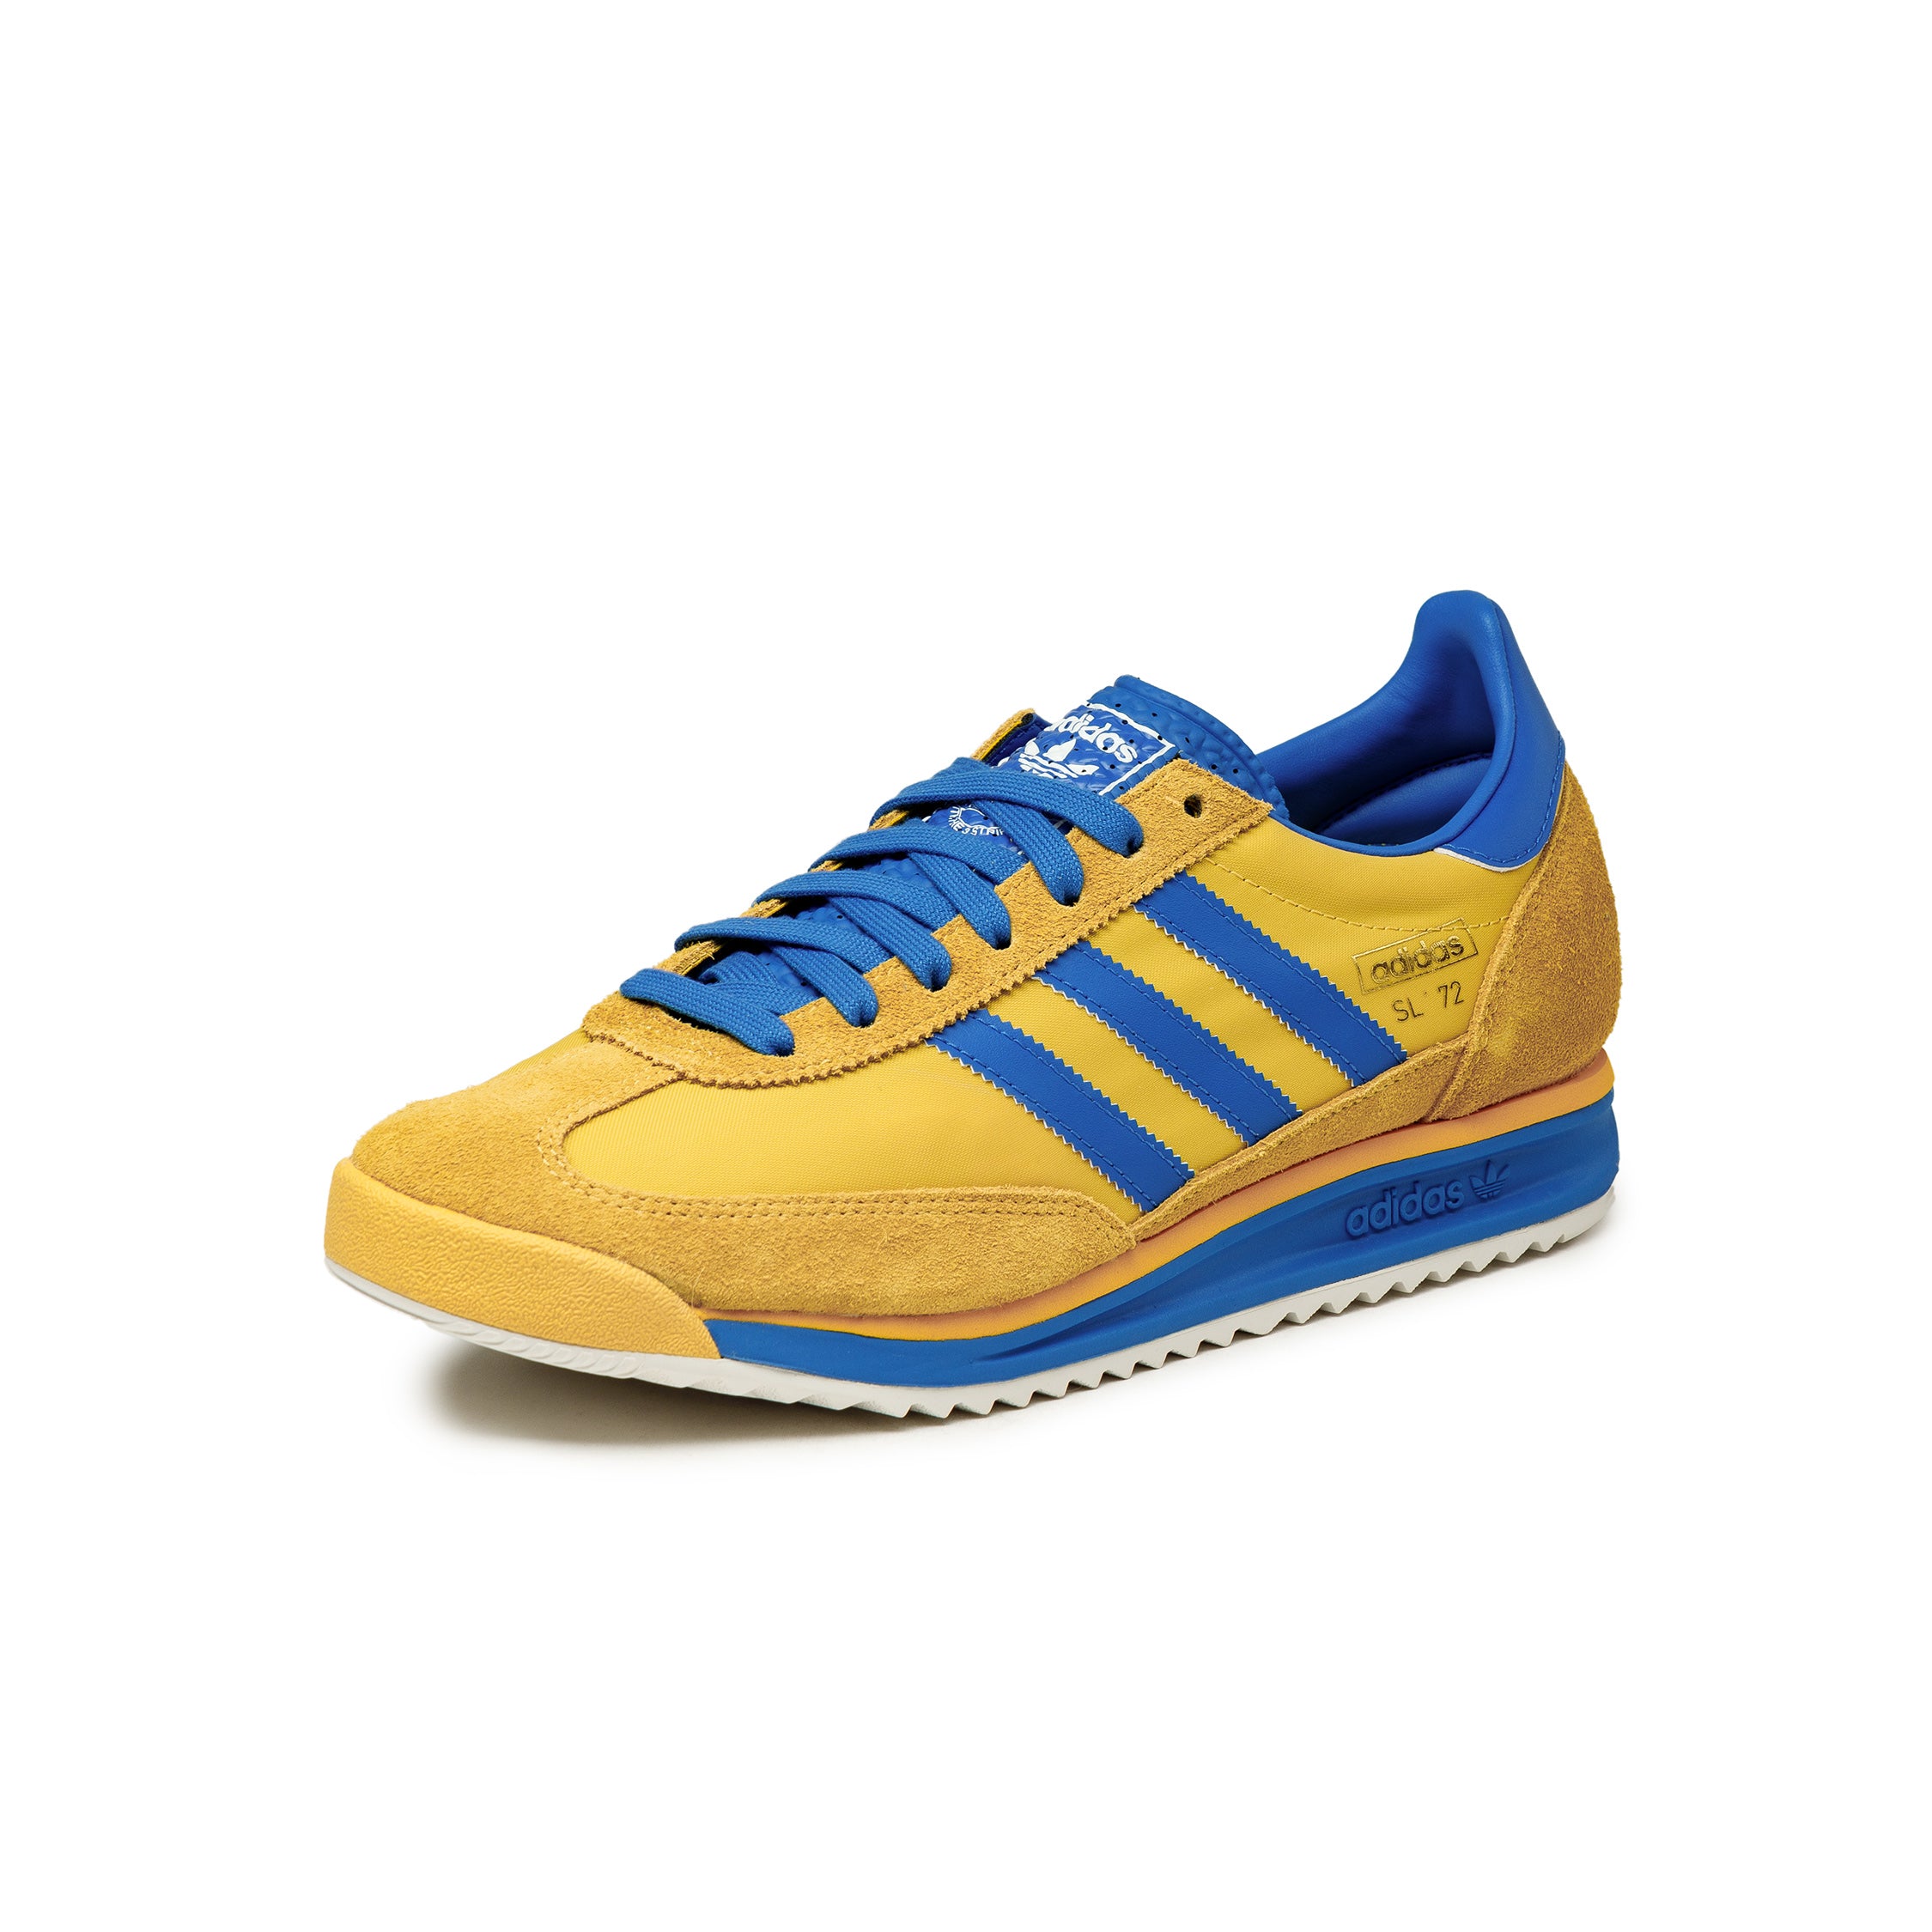 Adidas SL 72 RS » Buy online now!